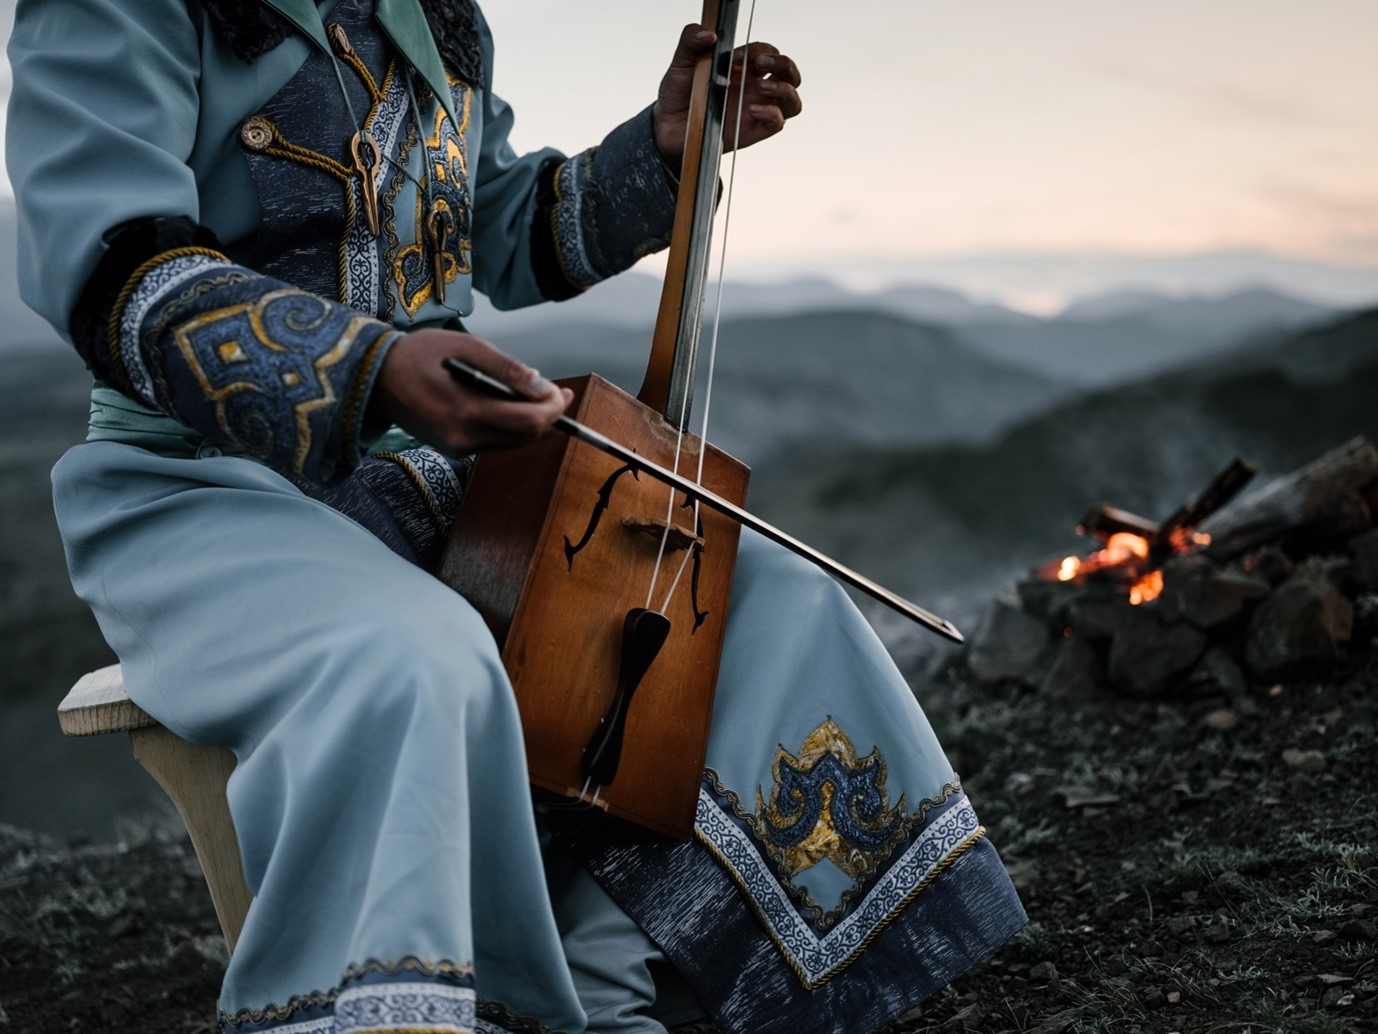 A man dressed in cultural clothing is playing an instrument.